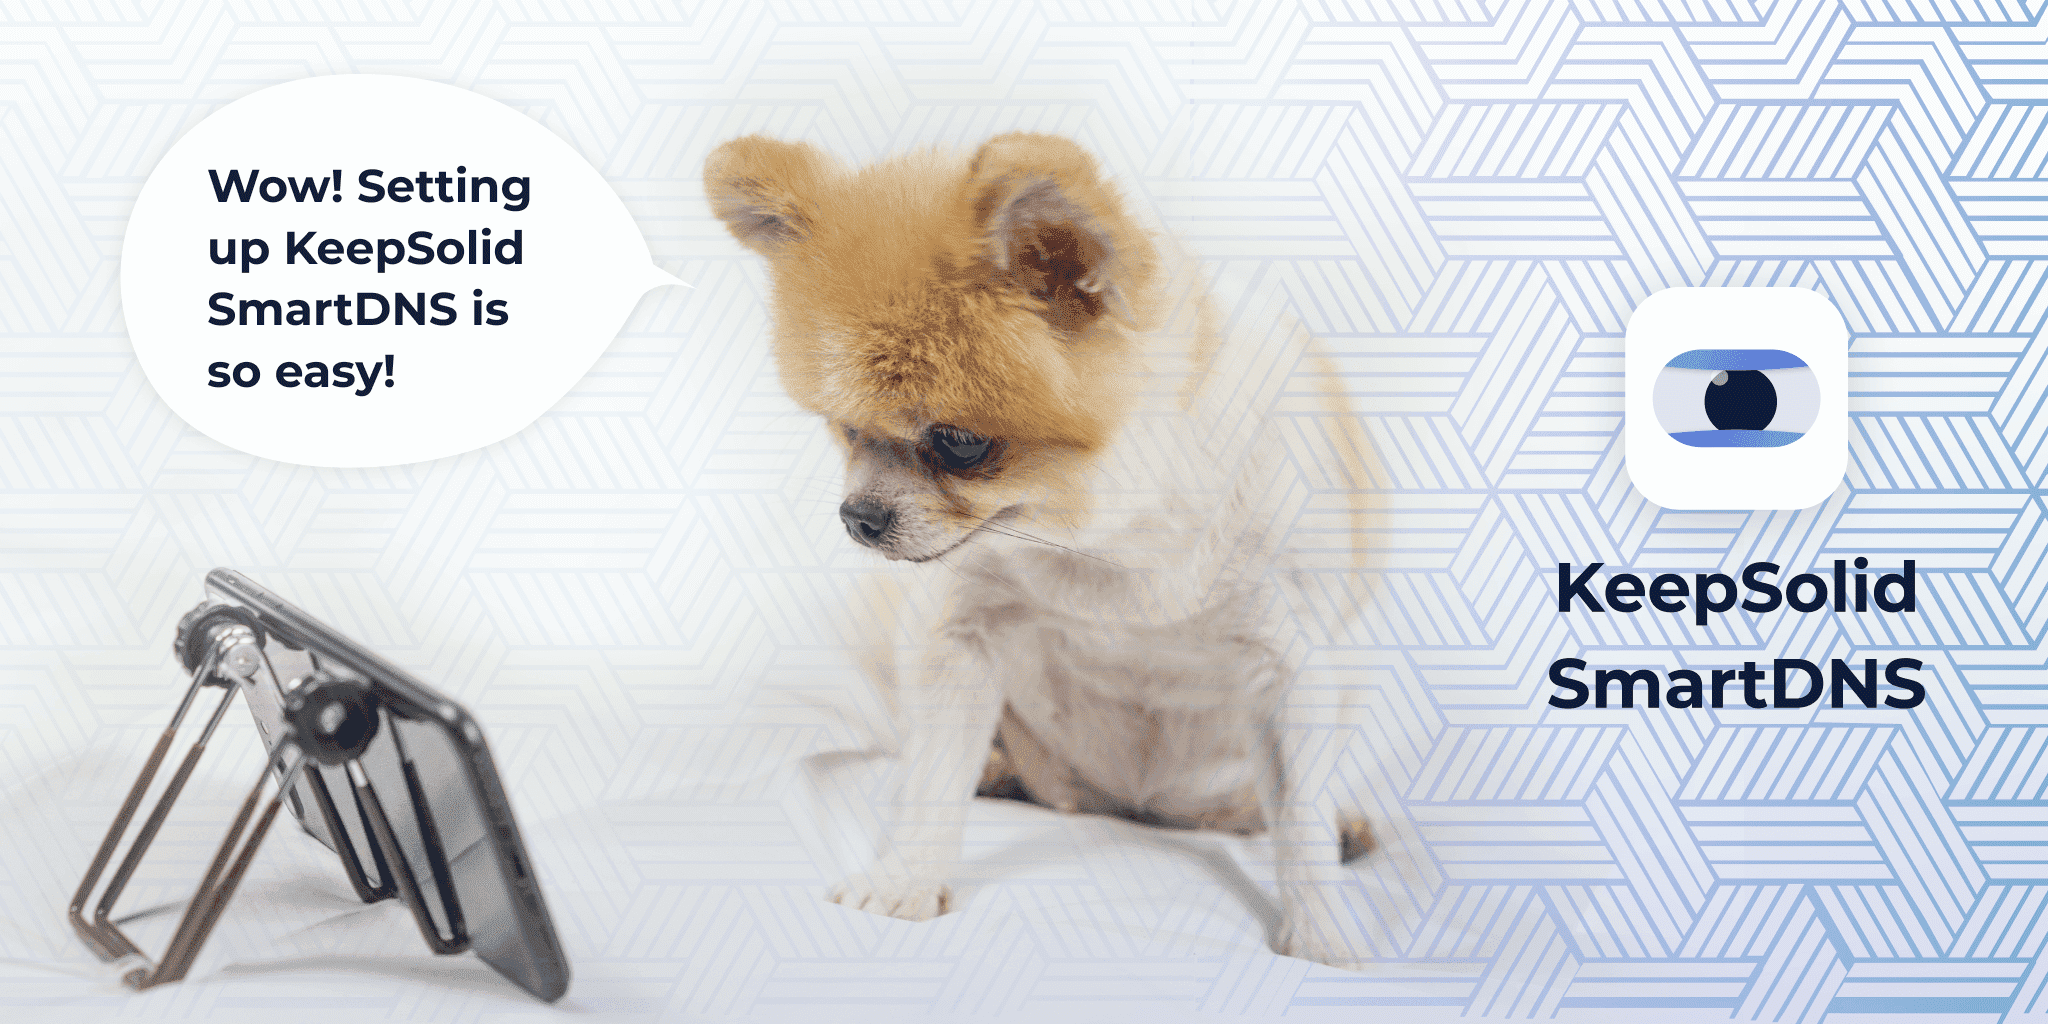 Pomeranian dog watching Netflix on smartphone on the bed with KeepSolid SmartDNS app